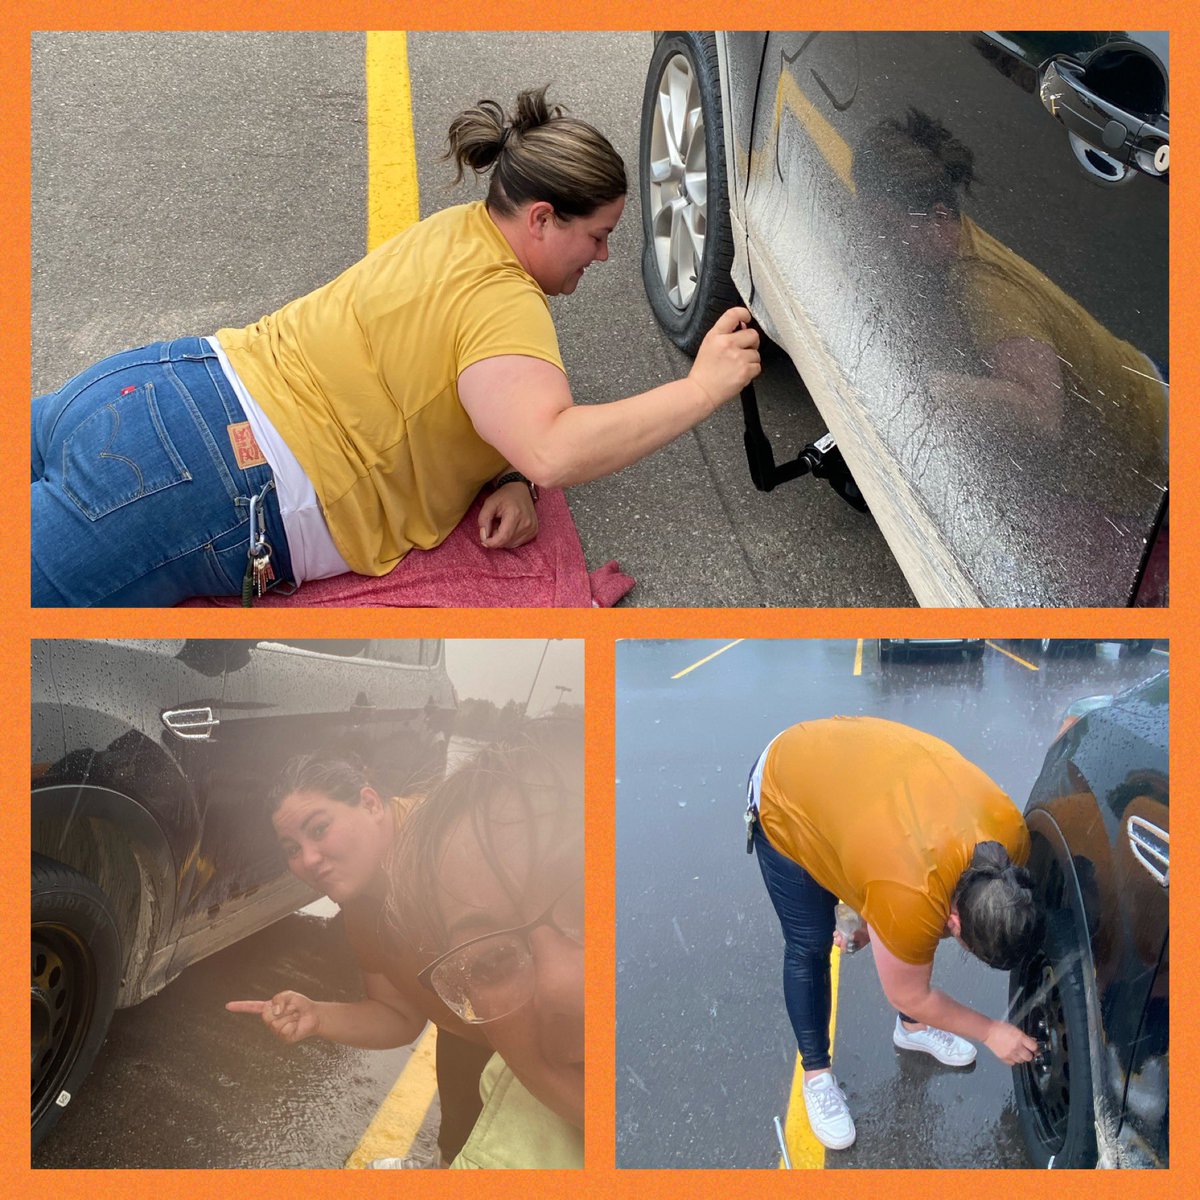 We truly live our Values here at @HomeDepotBright! The amazing @megan000nicole Taking Care of Our People by changing a tire for @Debbie14128887 in the pouring rain! Great job! @Mark_Gridley @JulieGiattino @JoshuaMendiol17 @jo_yates4 @smt81